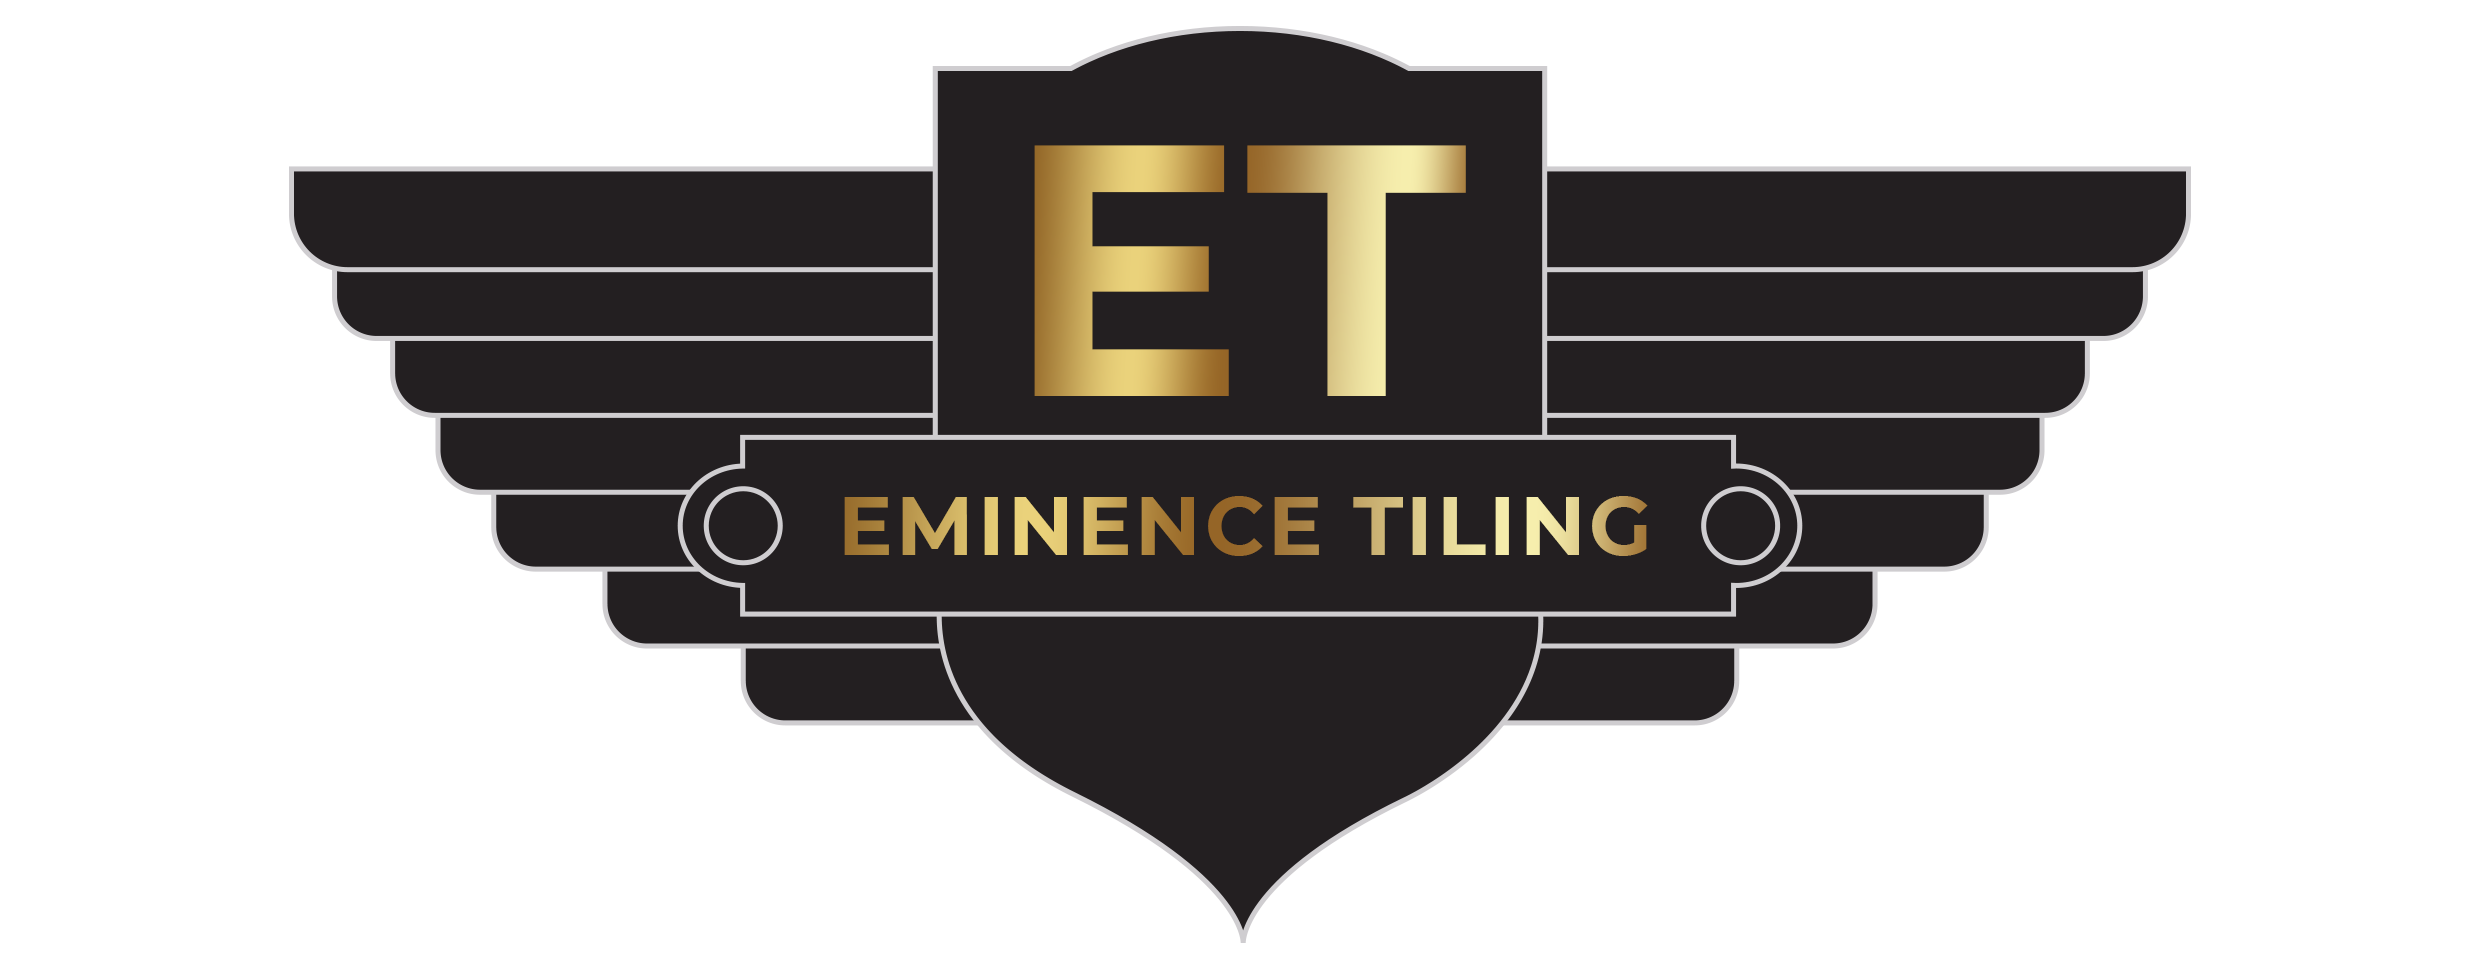 Eminence tiling logo with black wings